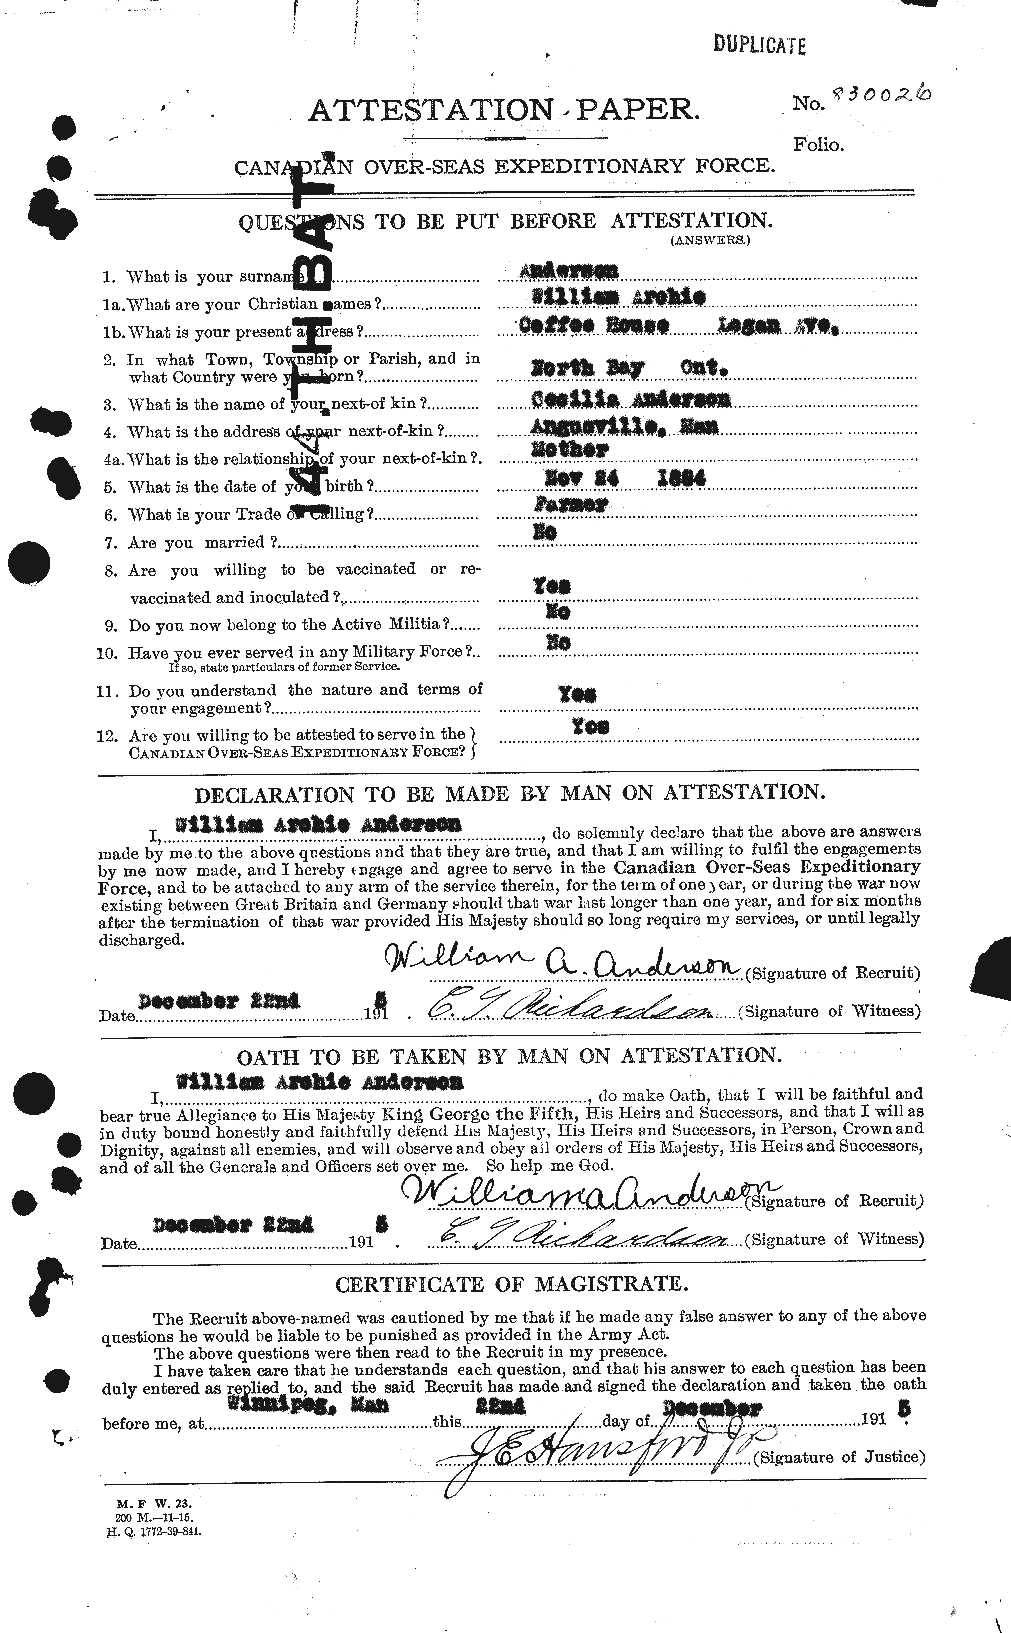 Personnel Records of the First World War - CEF 210741a